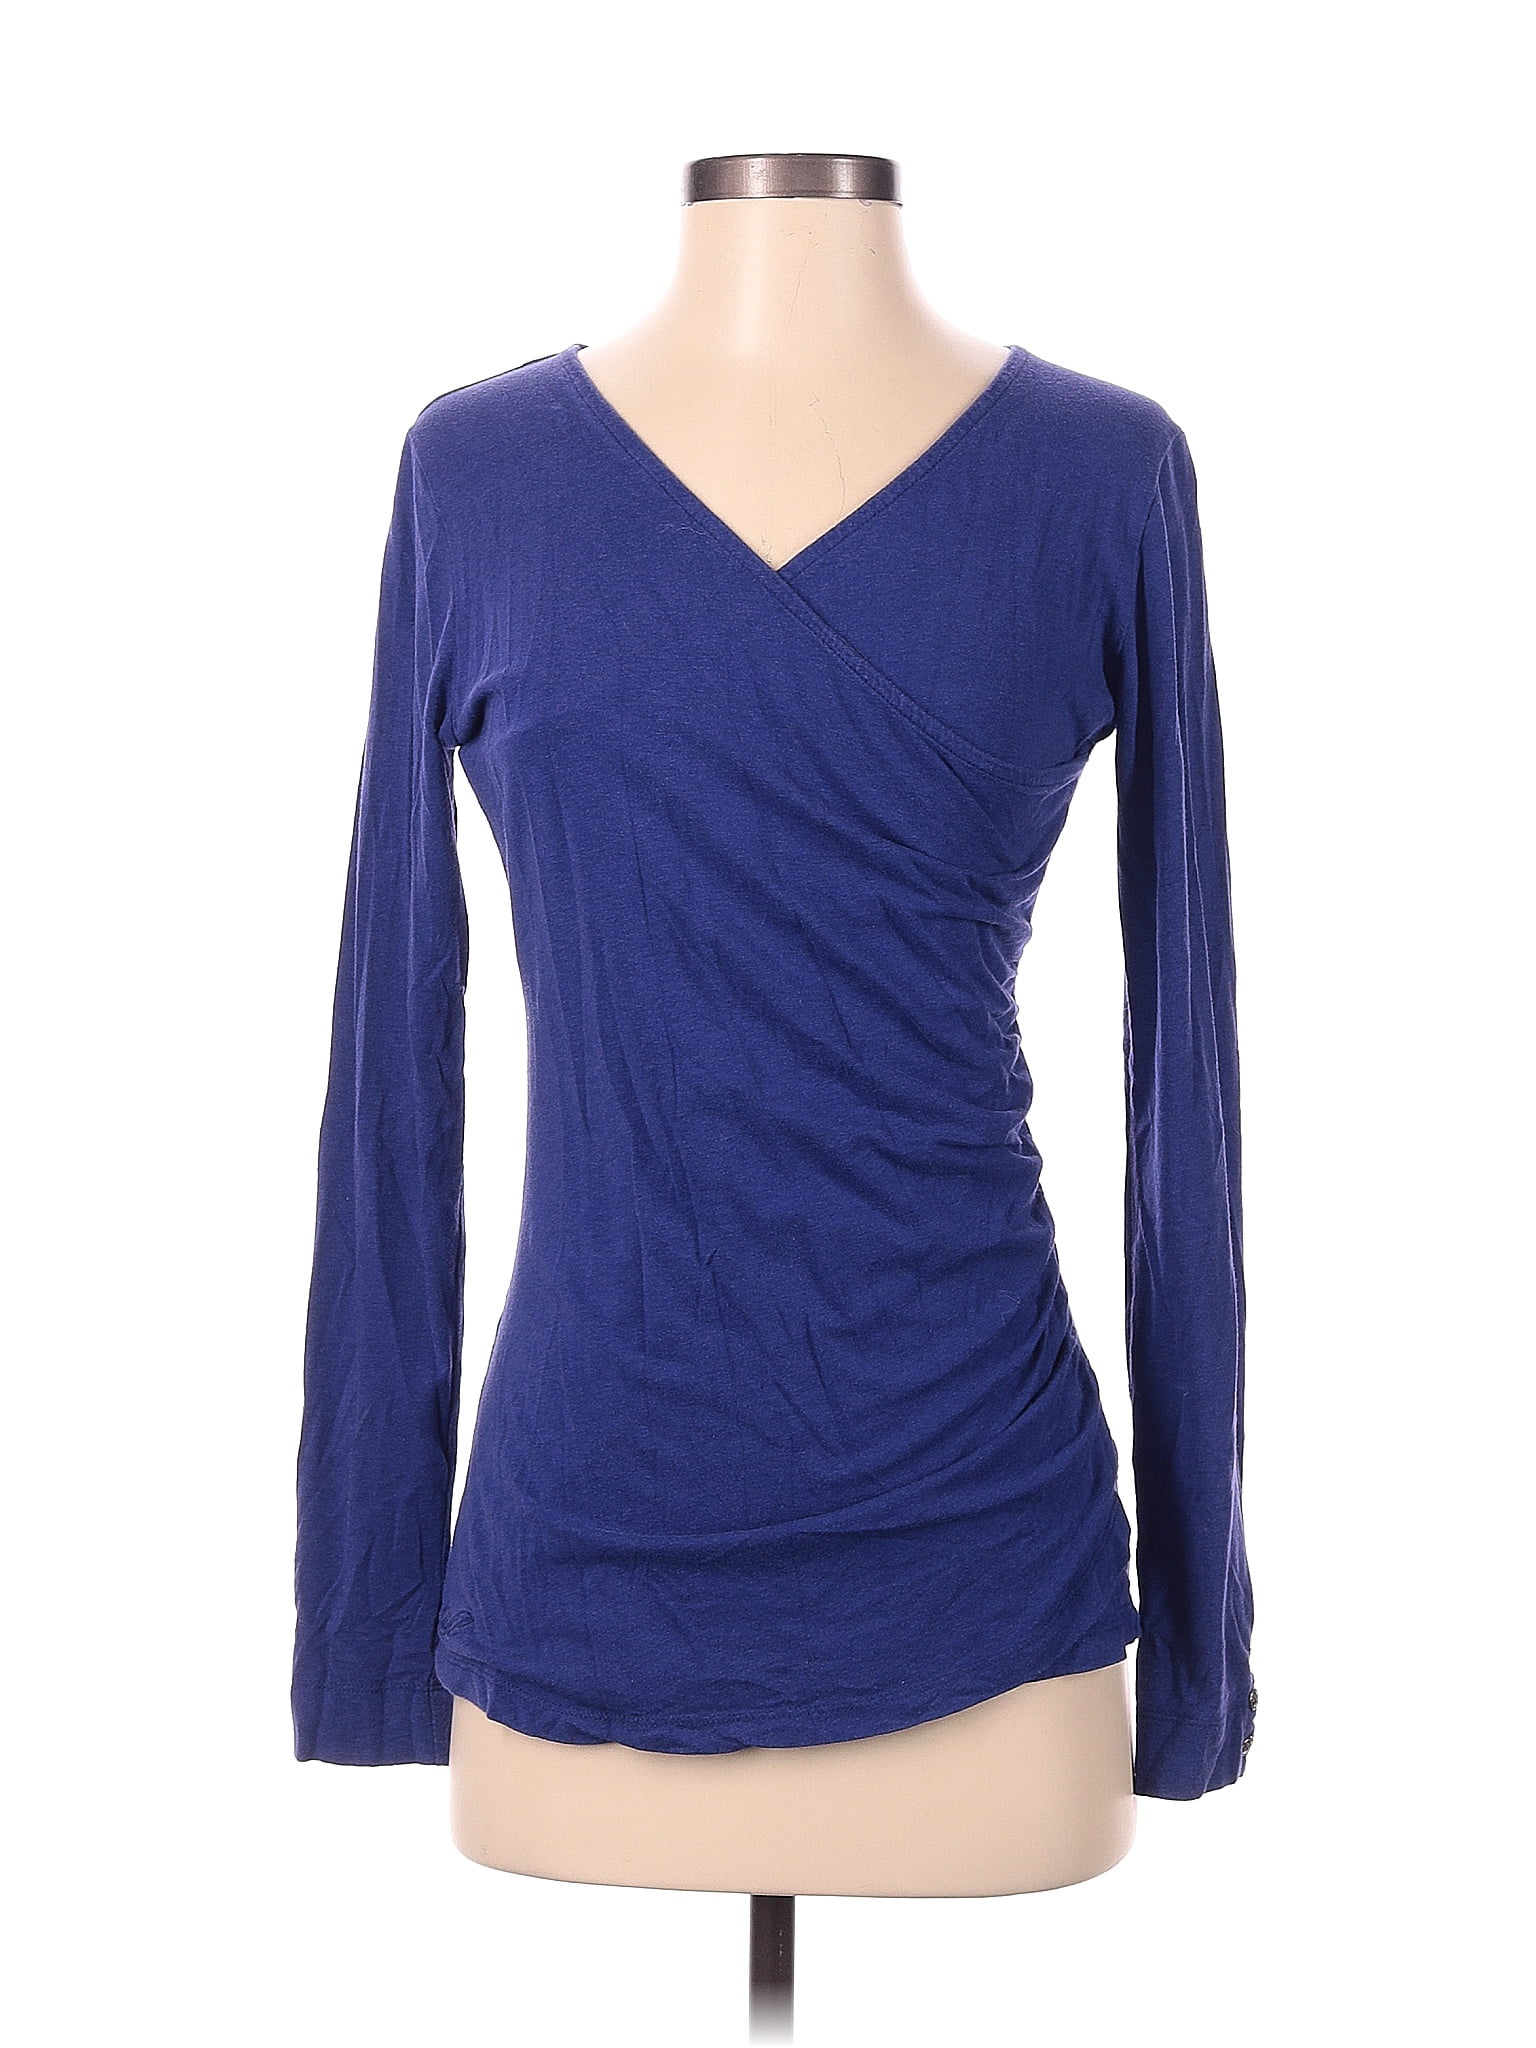 Kuhl Sapphire Blue Long Sleeve Top Size S - 62% off